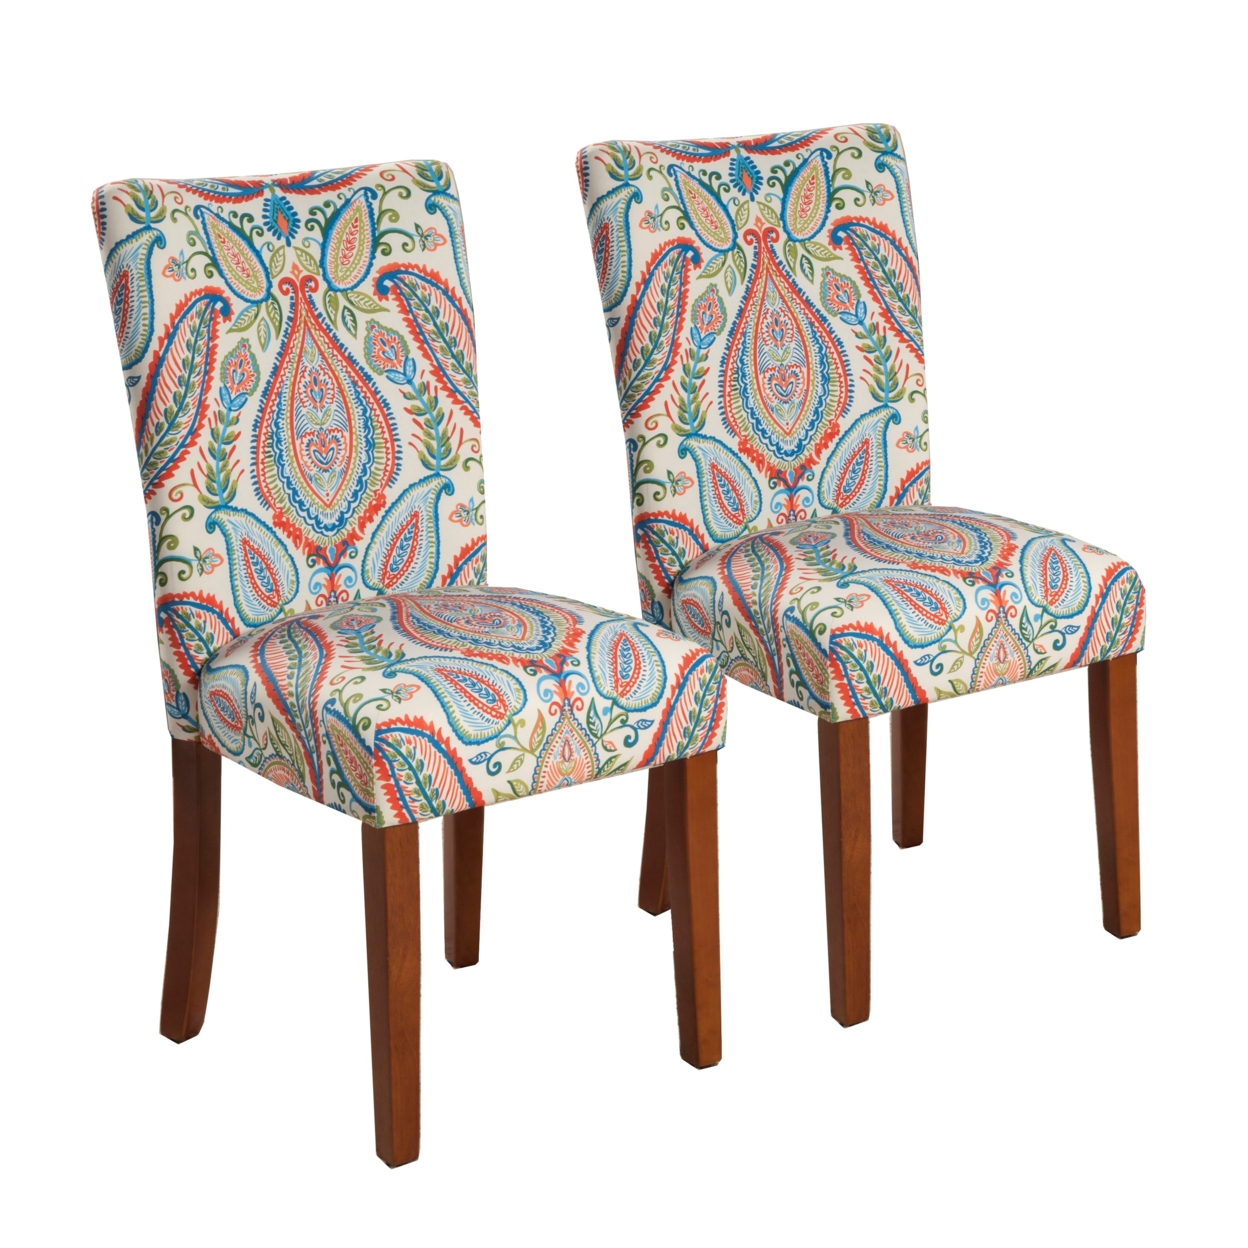 Wooden Dining Chair With Paisley Print Fabric Upholstery, Multicolor, Set Of Two- Saltoro Sherpi